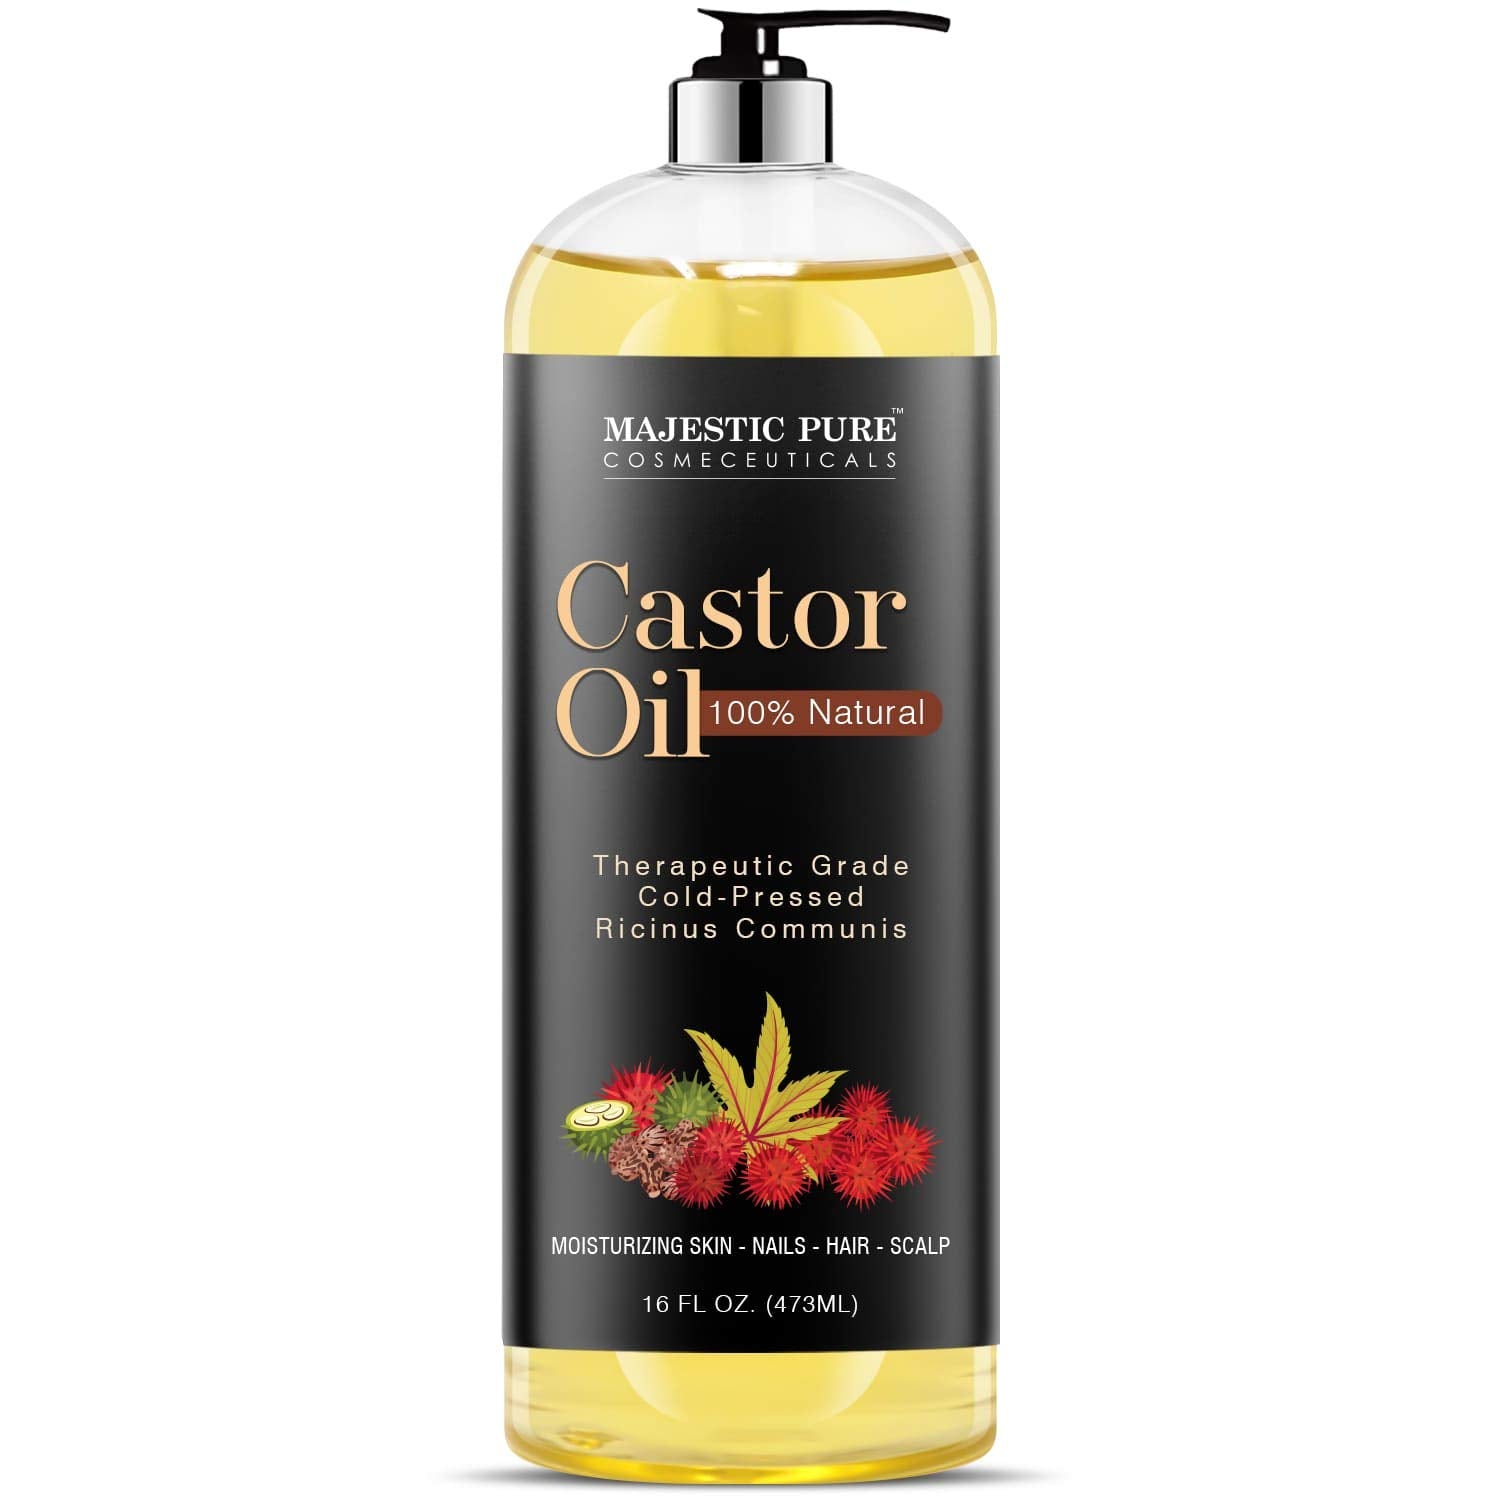 MAJESTIC PURE Castor Oil, 100% Natural Wonder Oil with Numerous Hair, Scalp, Skin and Nails Benefits - Packaging May Vary- 16 fl oz